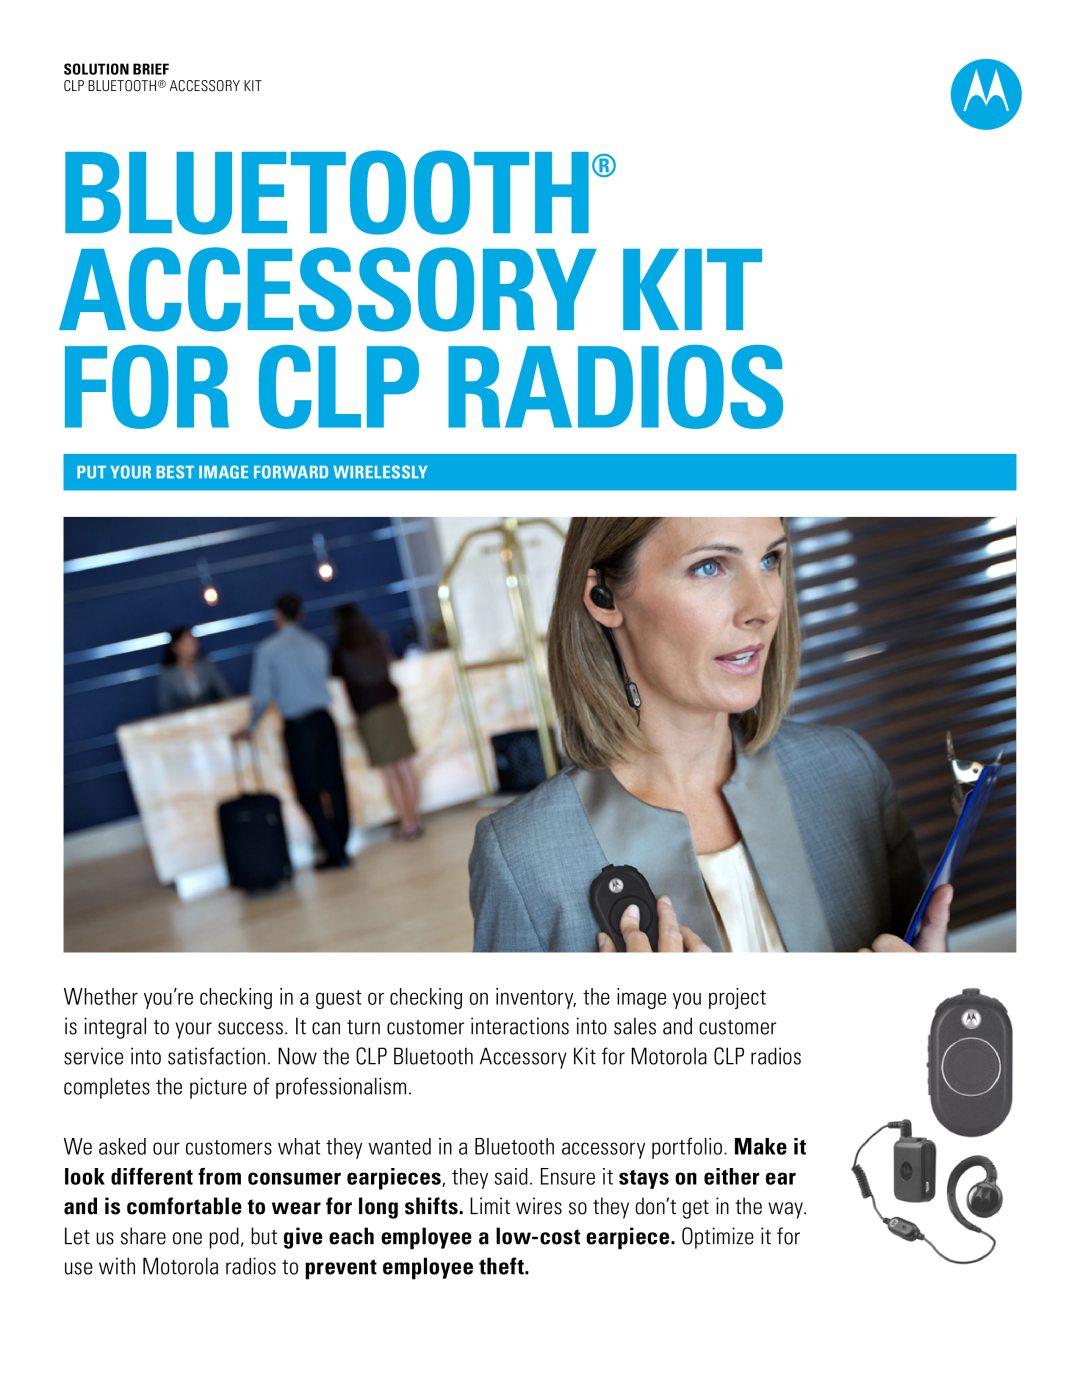 Motorola HKLN4509, HKLN4513 manual Bluetooth Accessory Kit For Clp Radios, Put Your Best Image Forward Wirelessly 